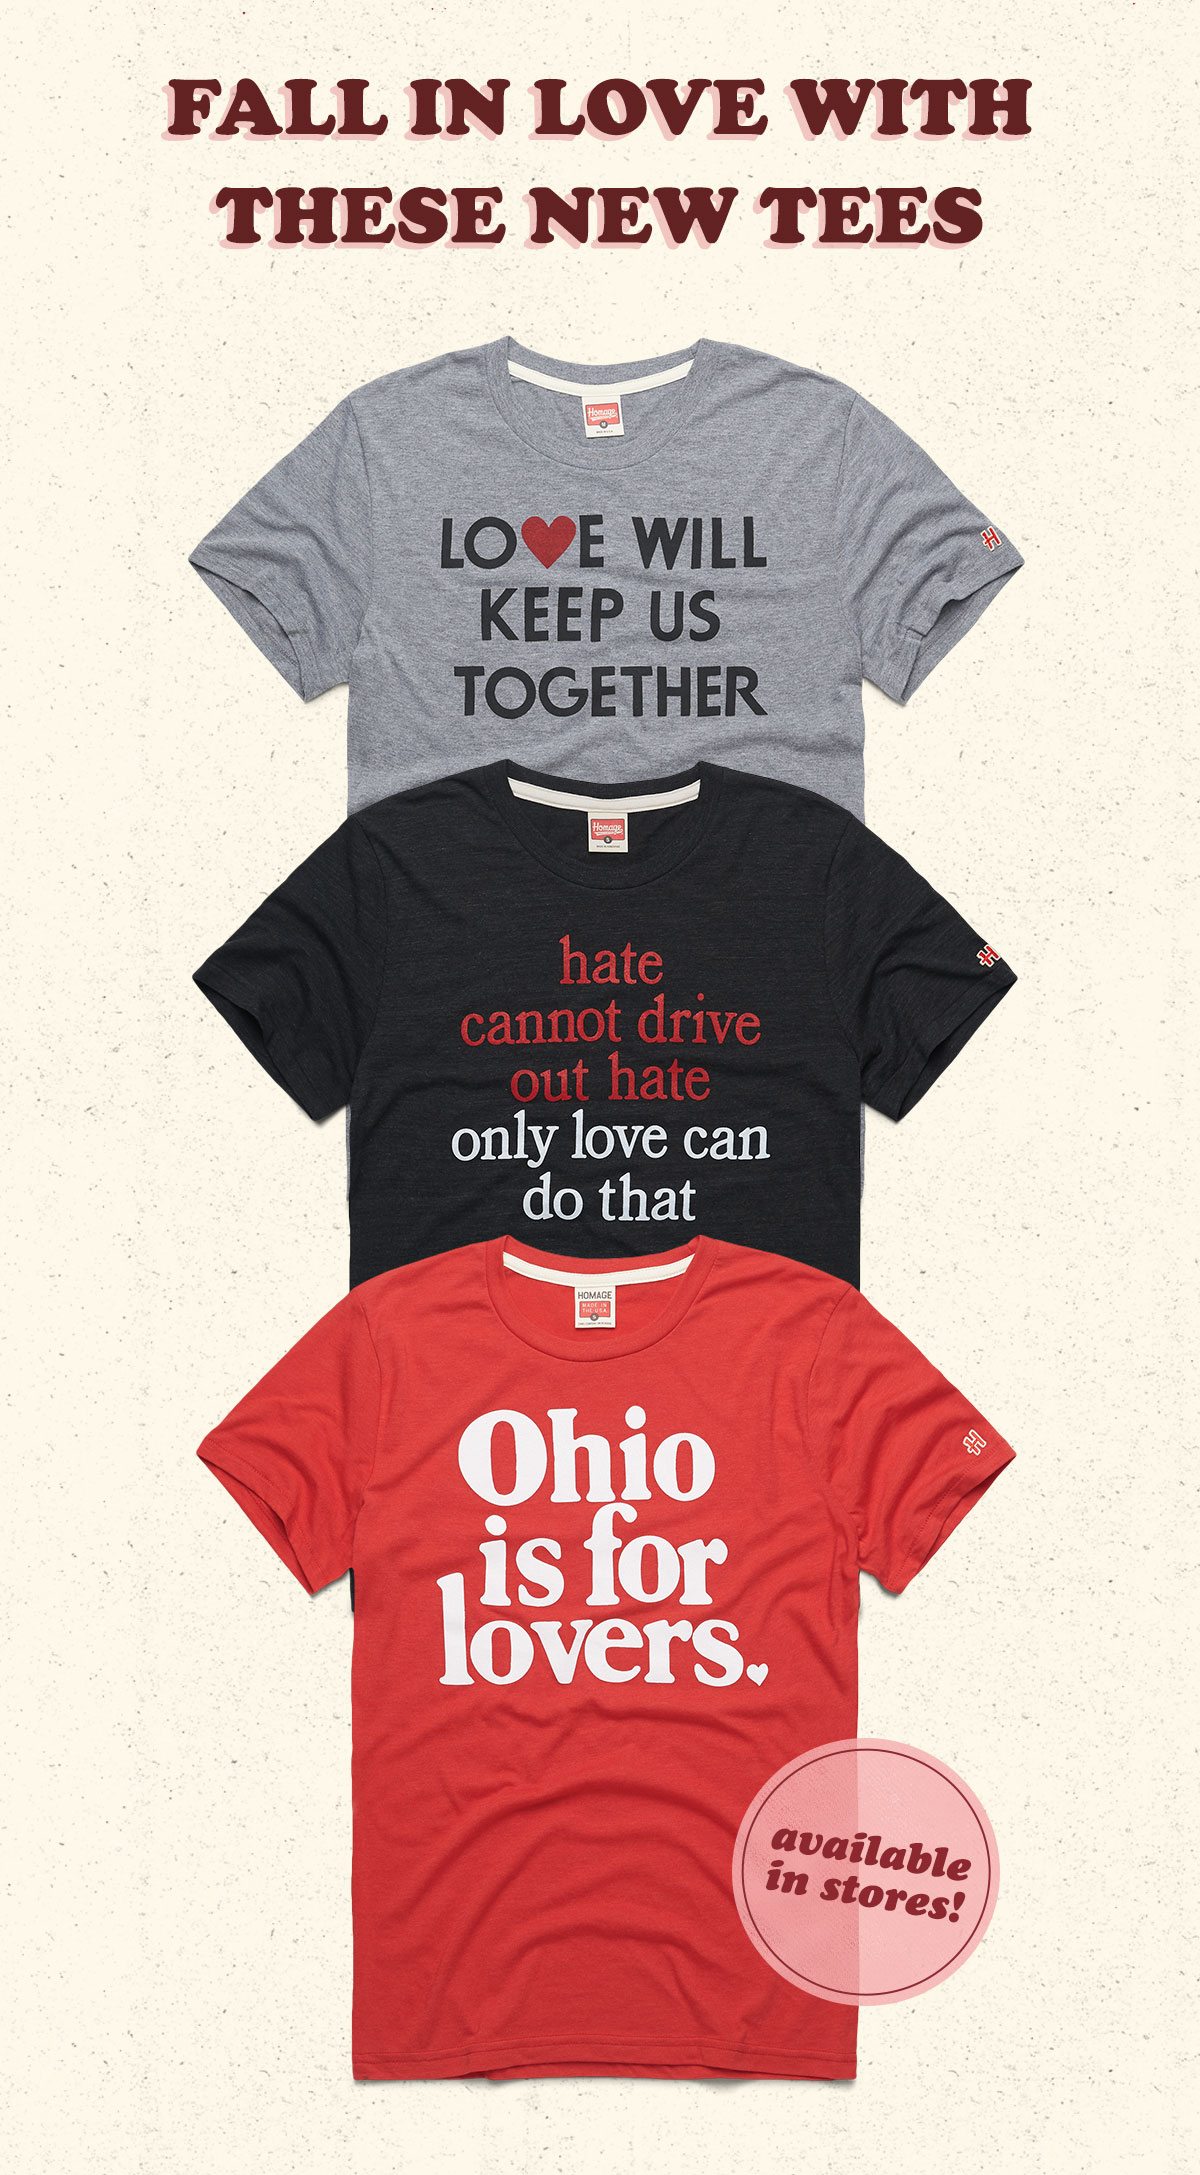 Fall in love with these new tees! Love Will Keep Up Together, Only Love, and Ohio Is For Lovers T-Shirts